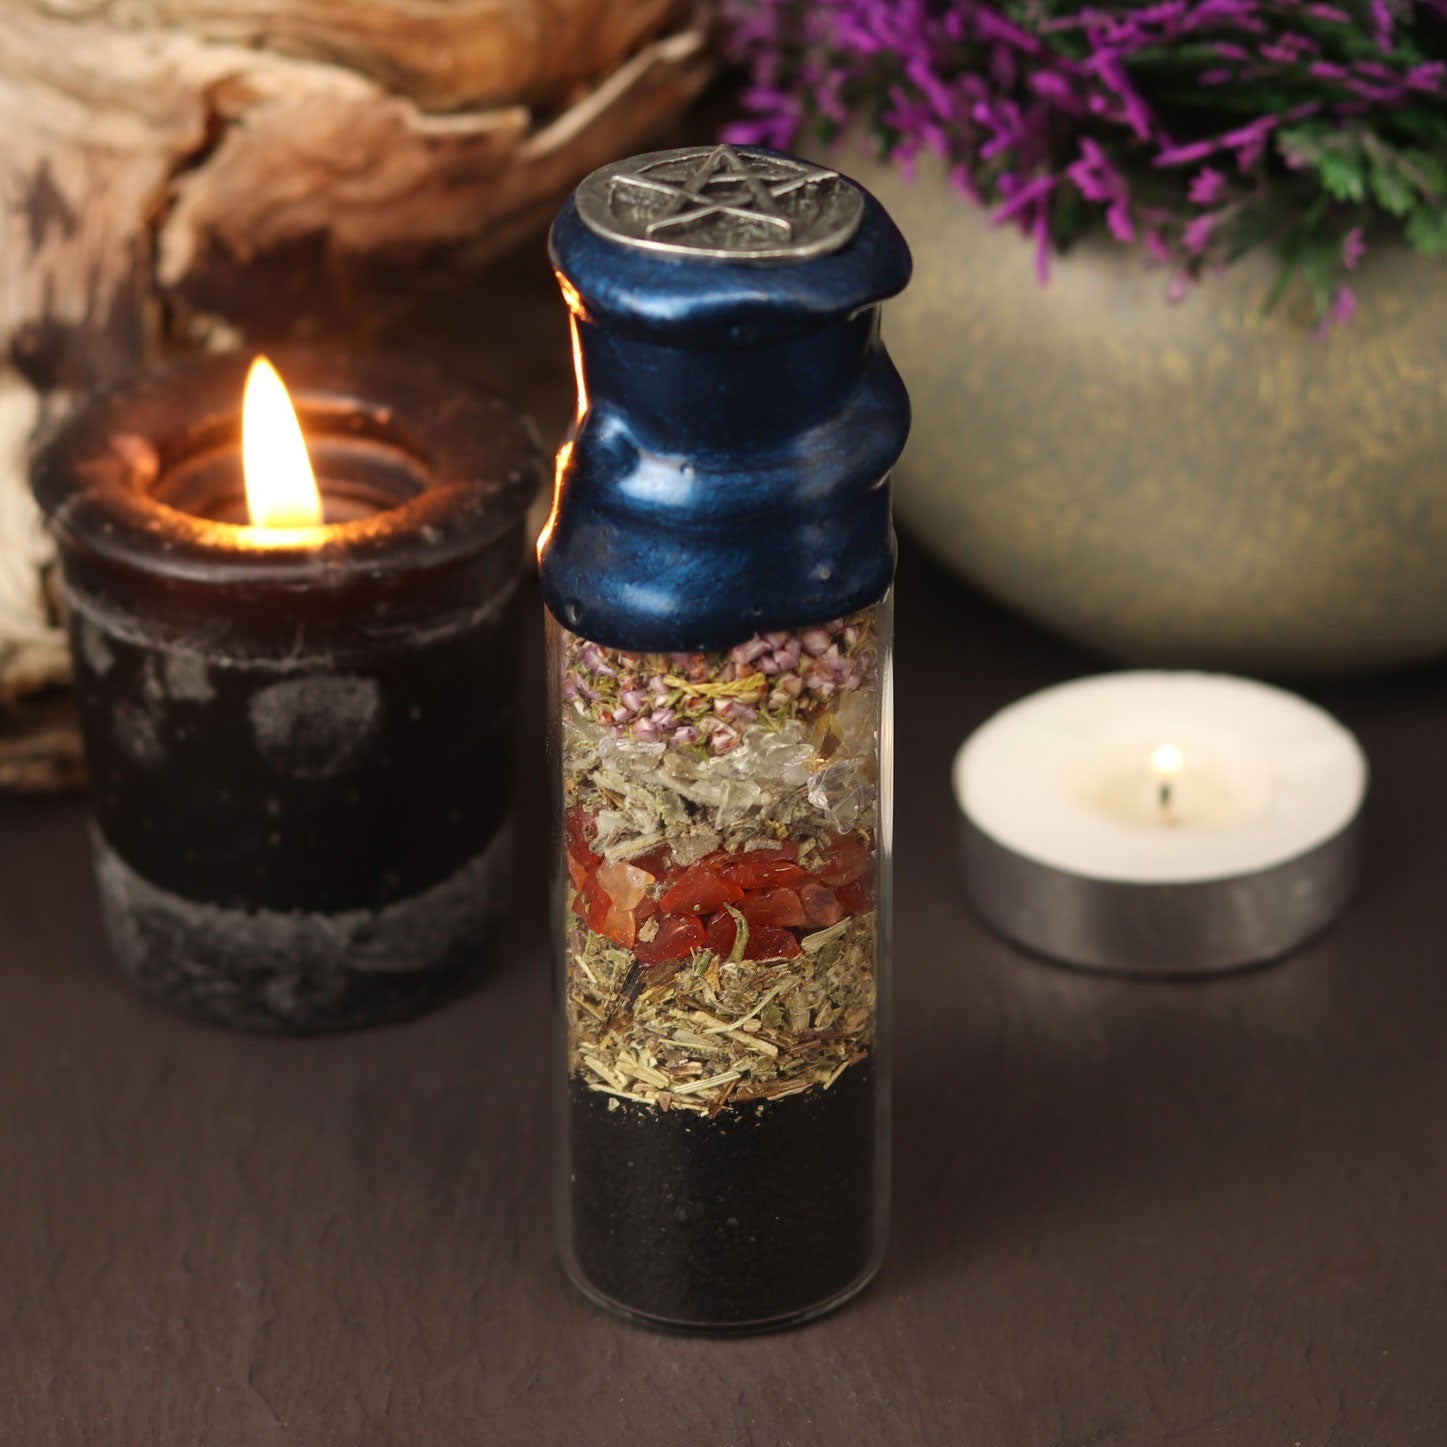 Pentacle Protection Spell Bottle - 13 Moons